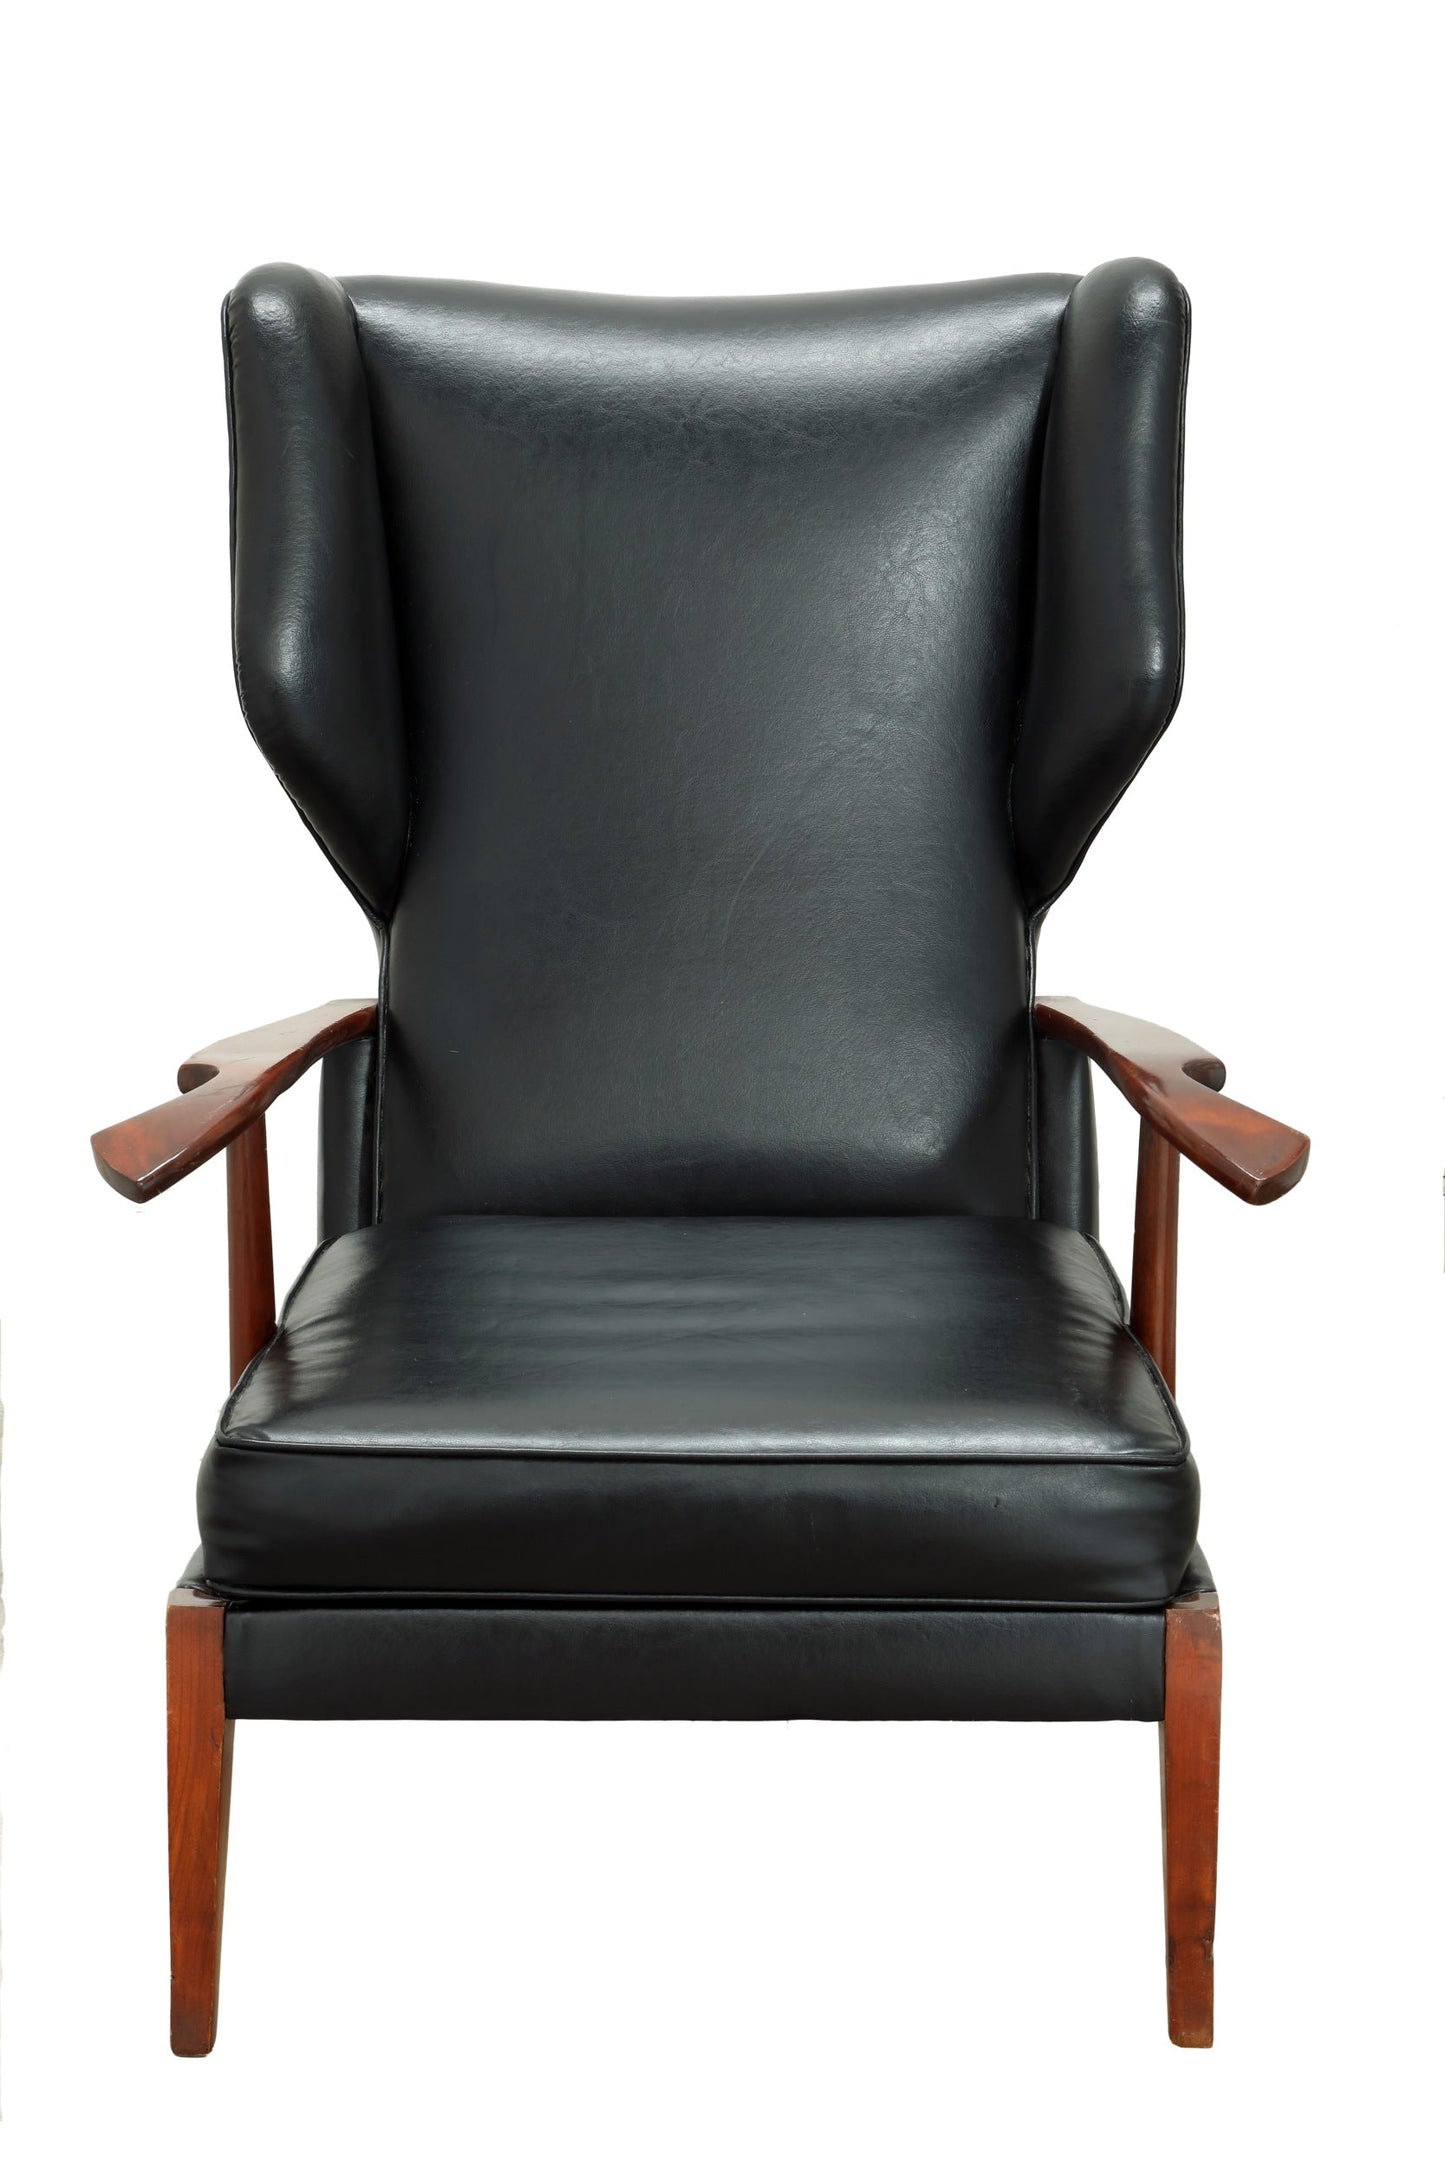 Paolo Buffa reclining armchair from the 1950s